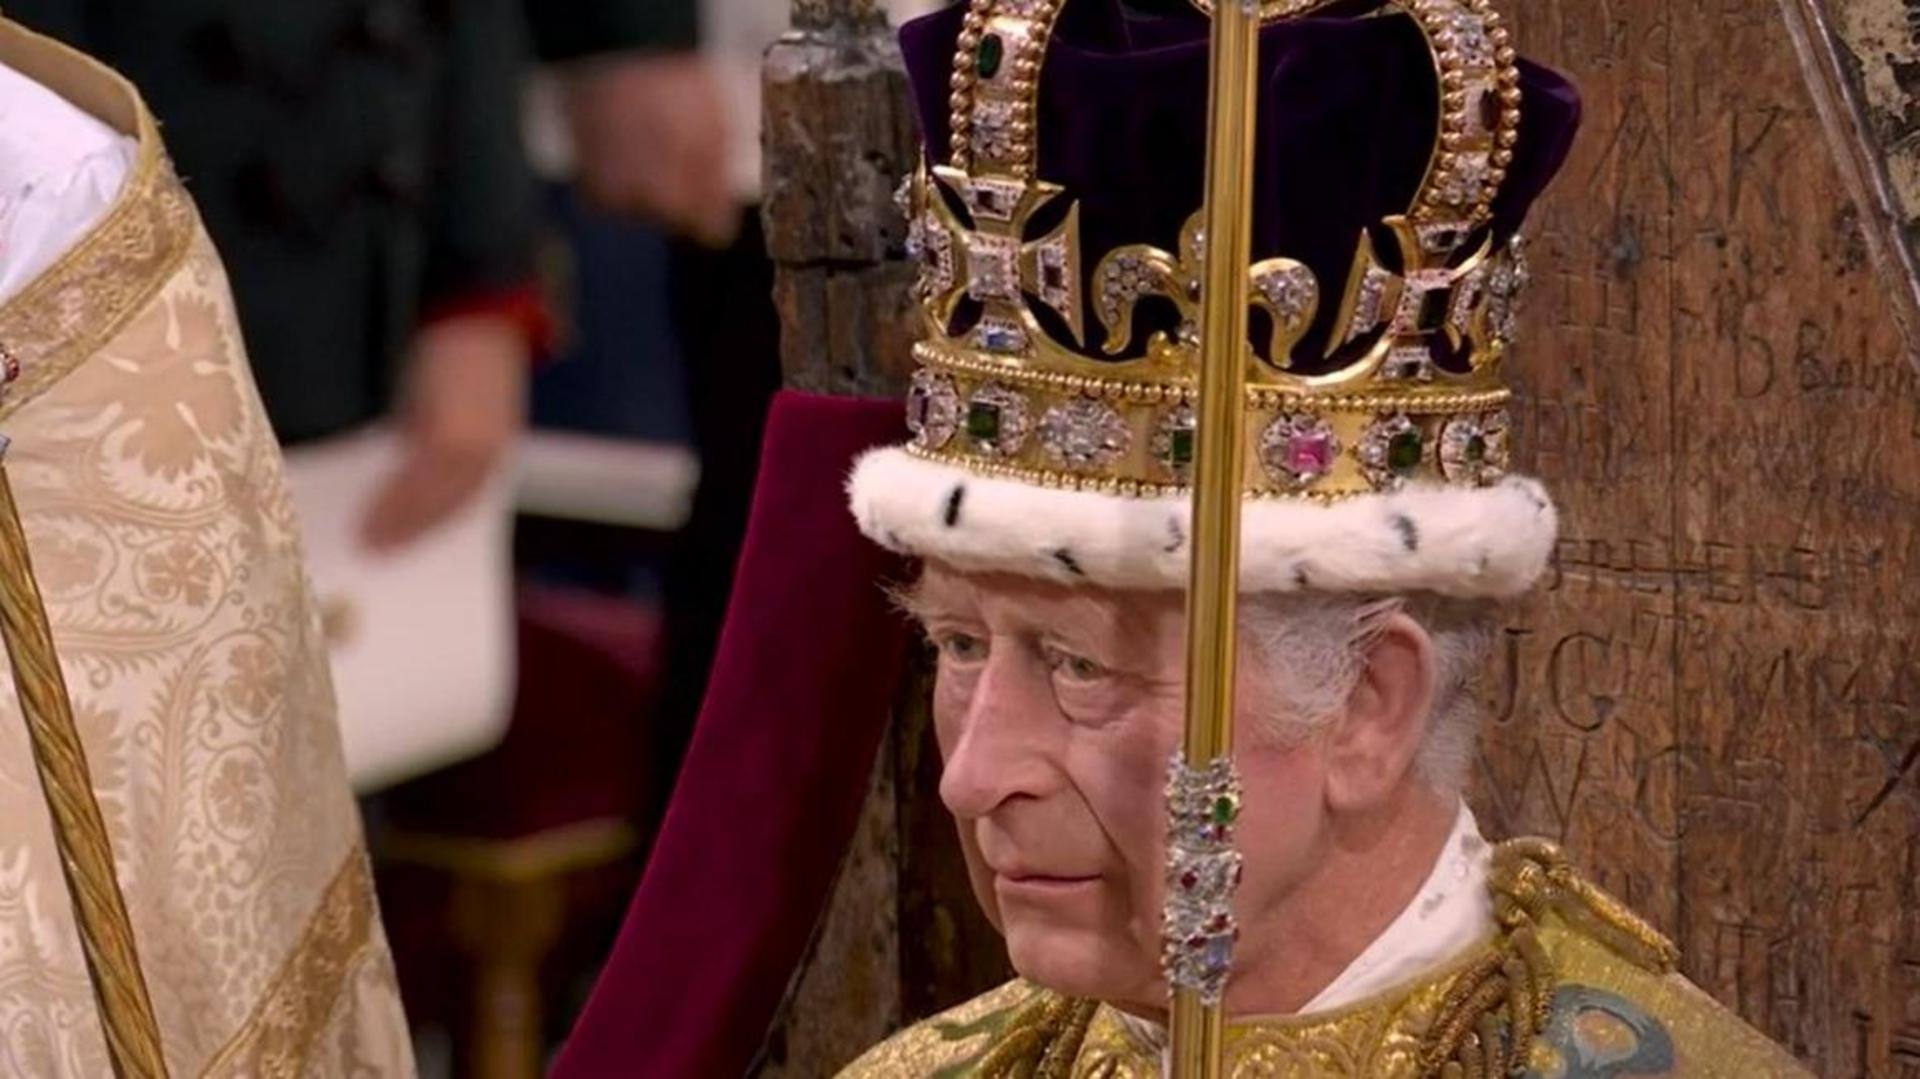 King Charles III, Queen Consort Camilla crowned at coronation ceremony